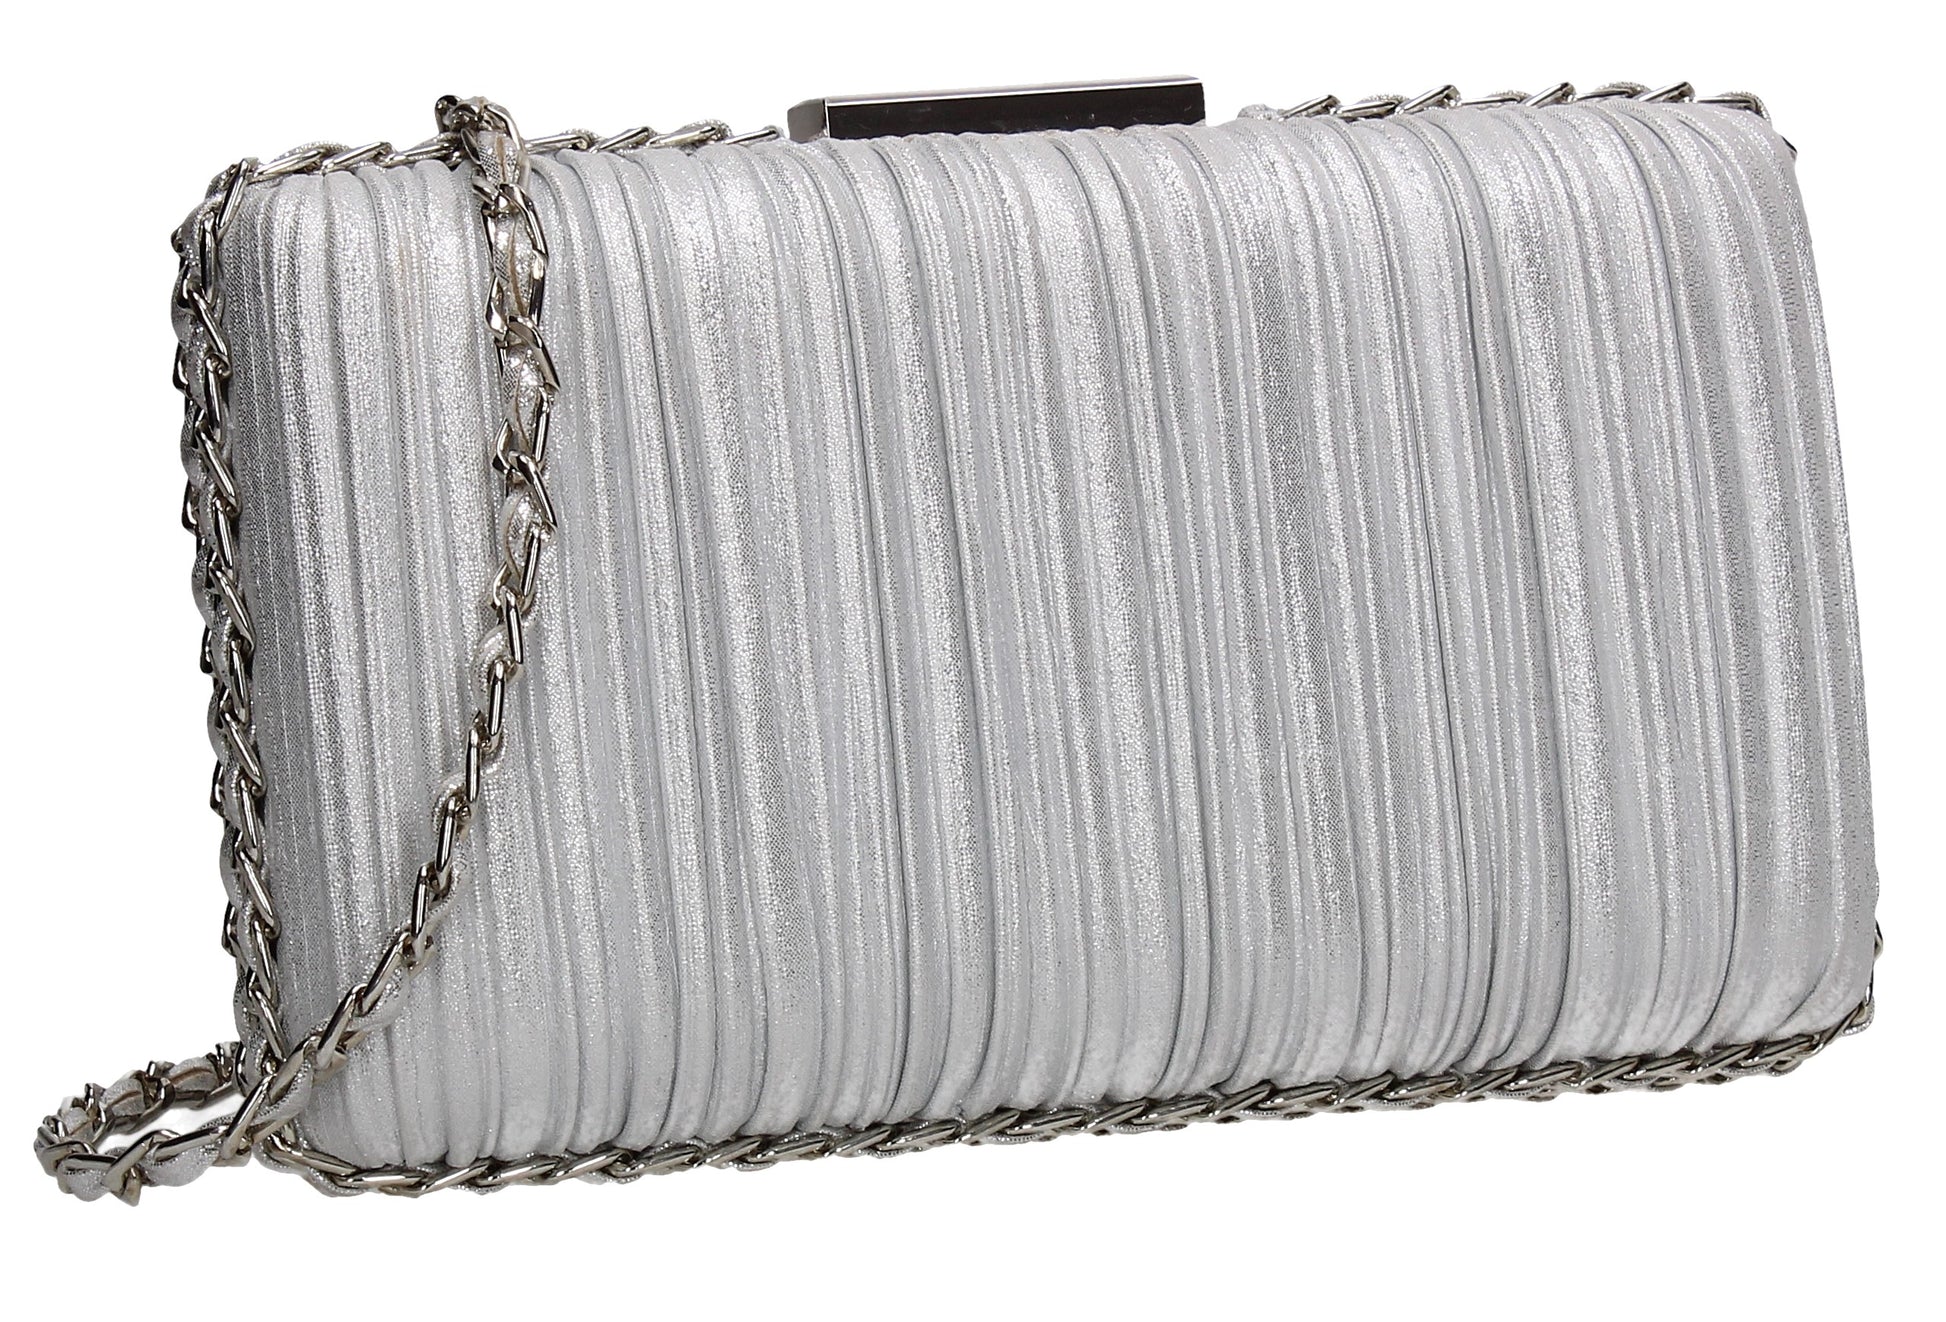 SWANKYSWANS Lacey Chain Clutch Bag Silver Cute Cheap Clutch Bag For Weddings School and Work